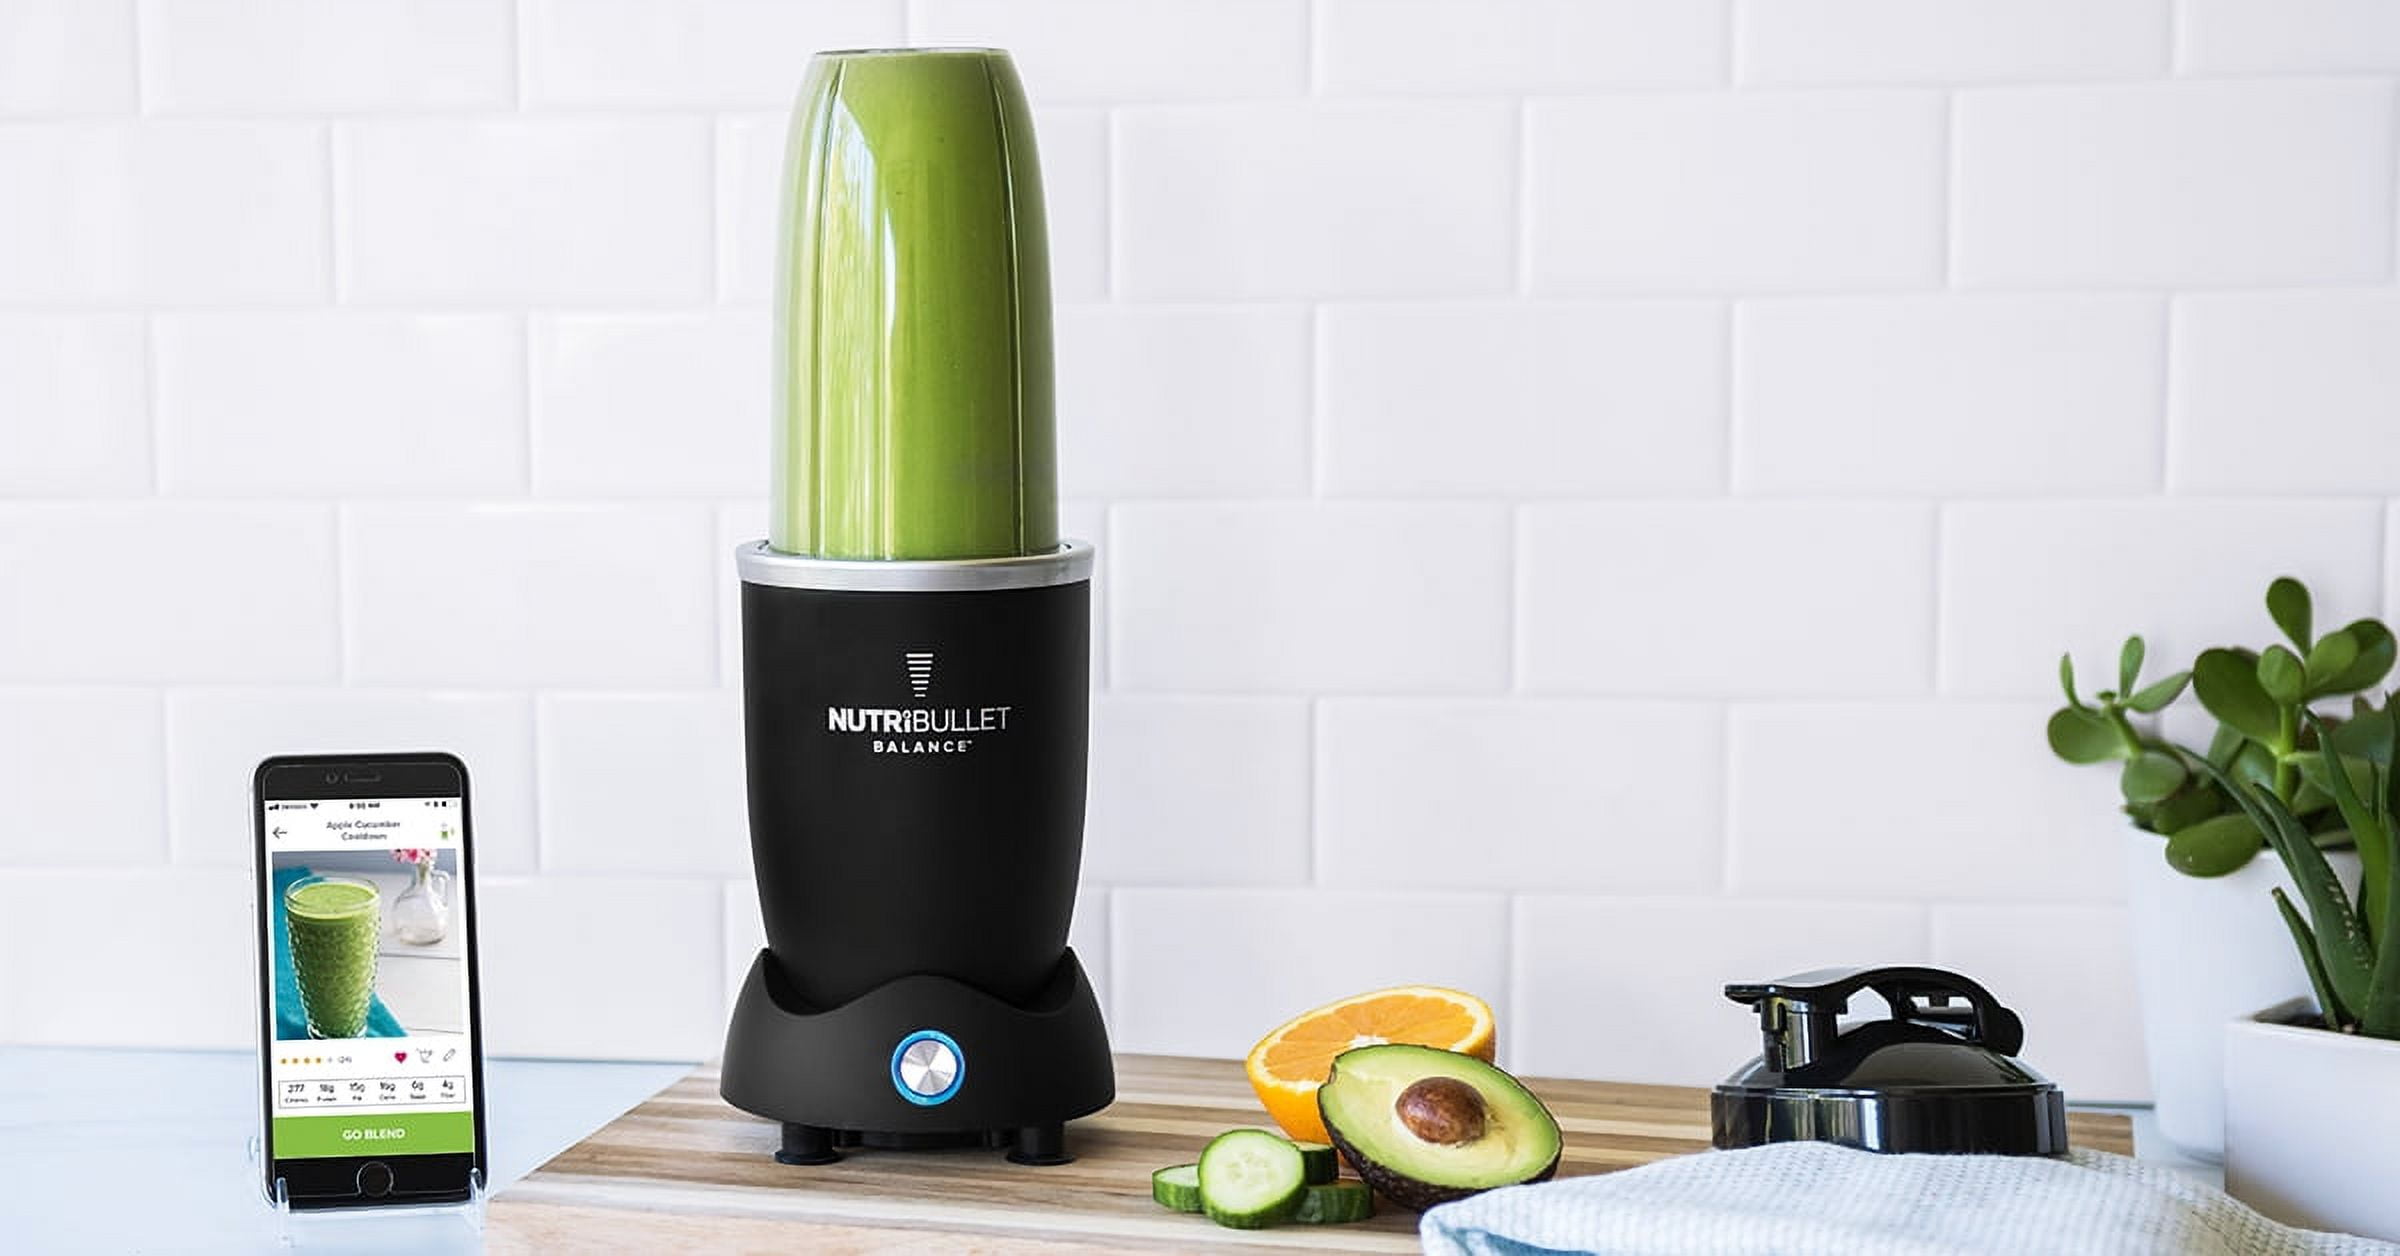 Nutribullet Balance Blender Review: Nutritionally Balanced Smoothies